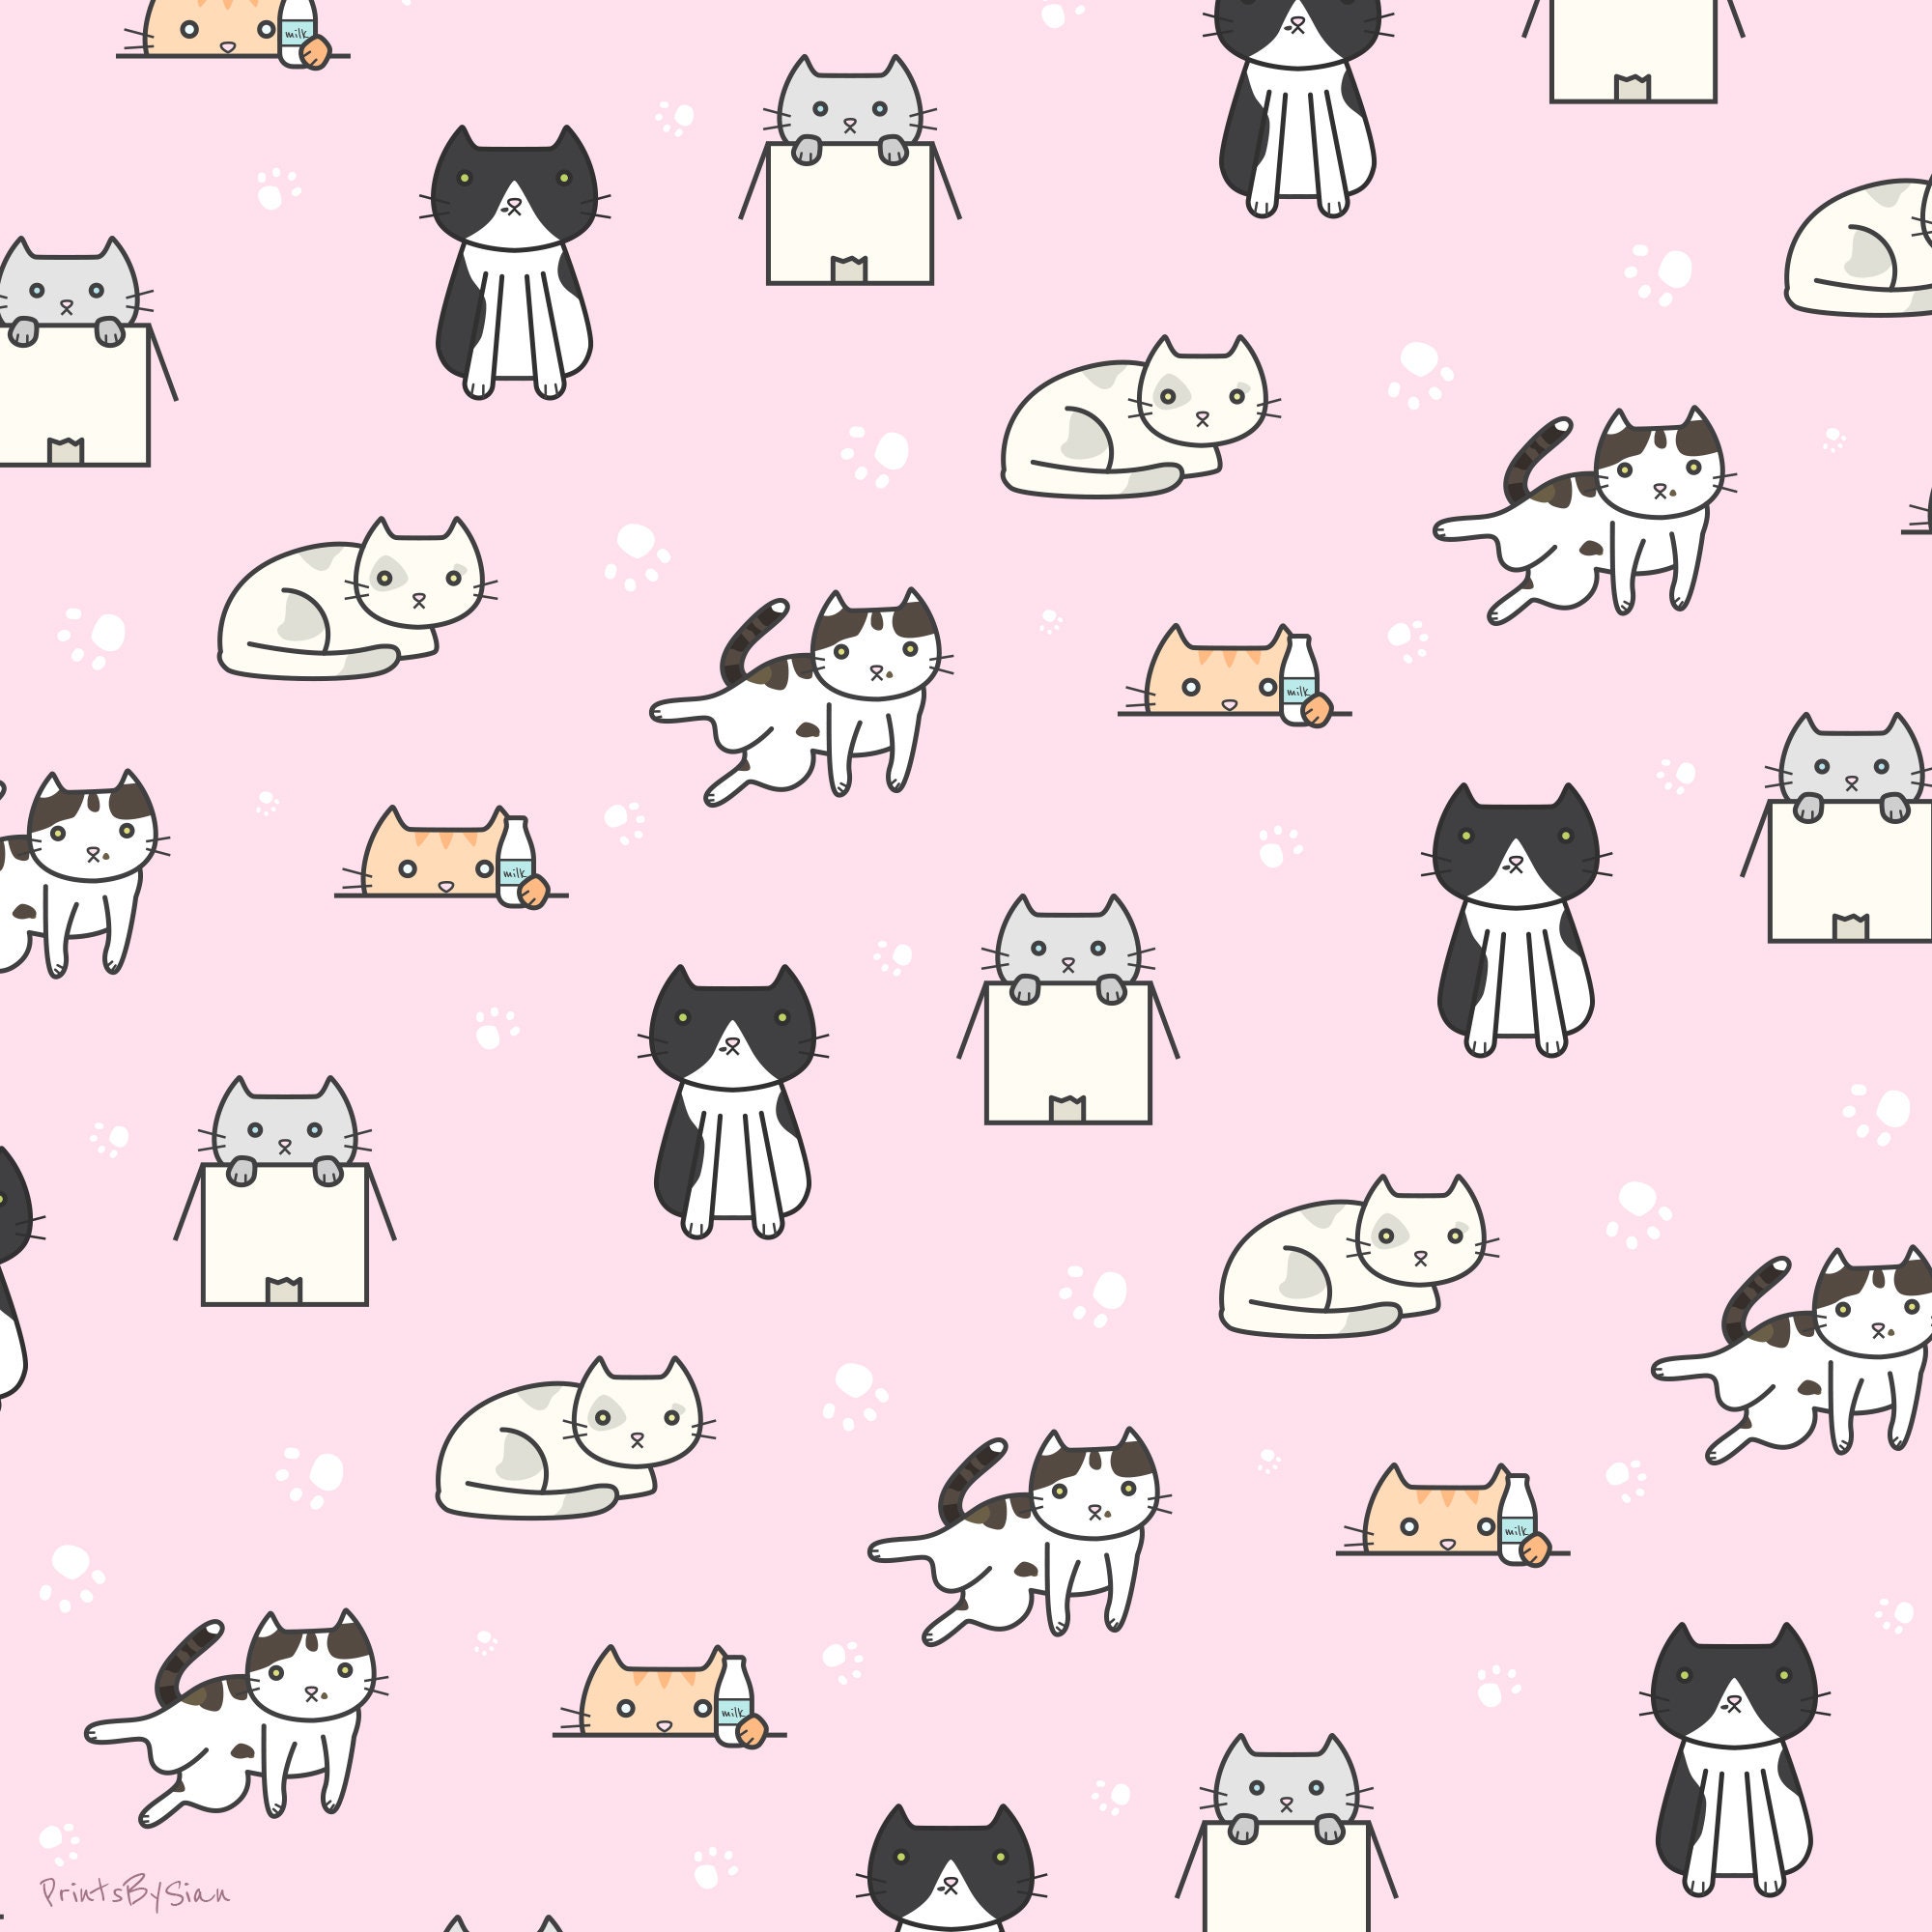 Cute Cat Pattern Wallpaper Pack Download for Android | Etsy